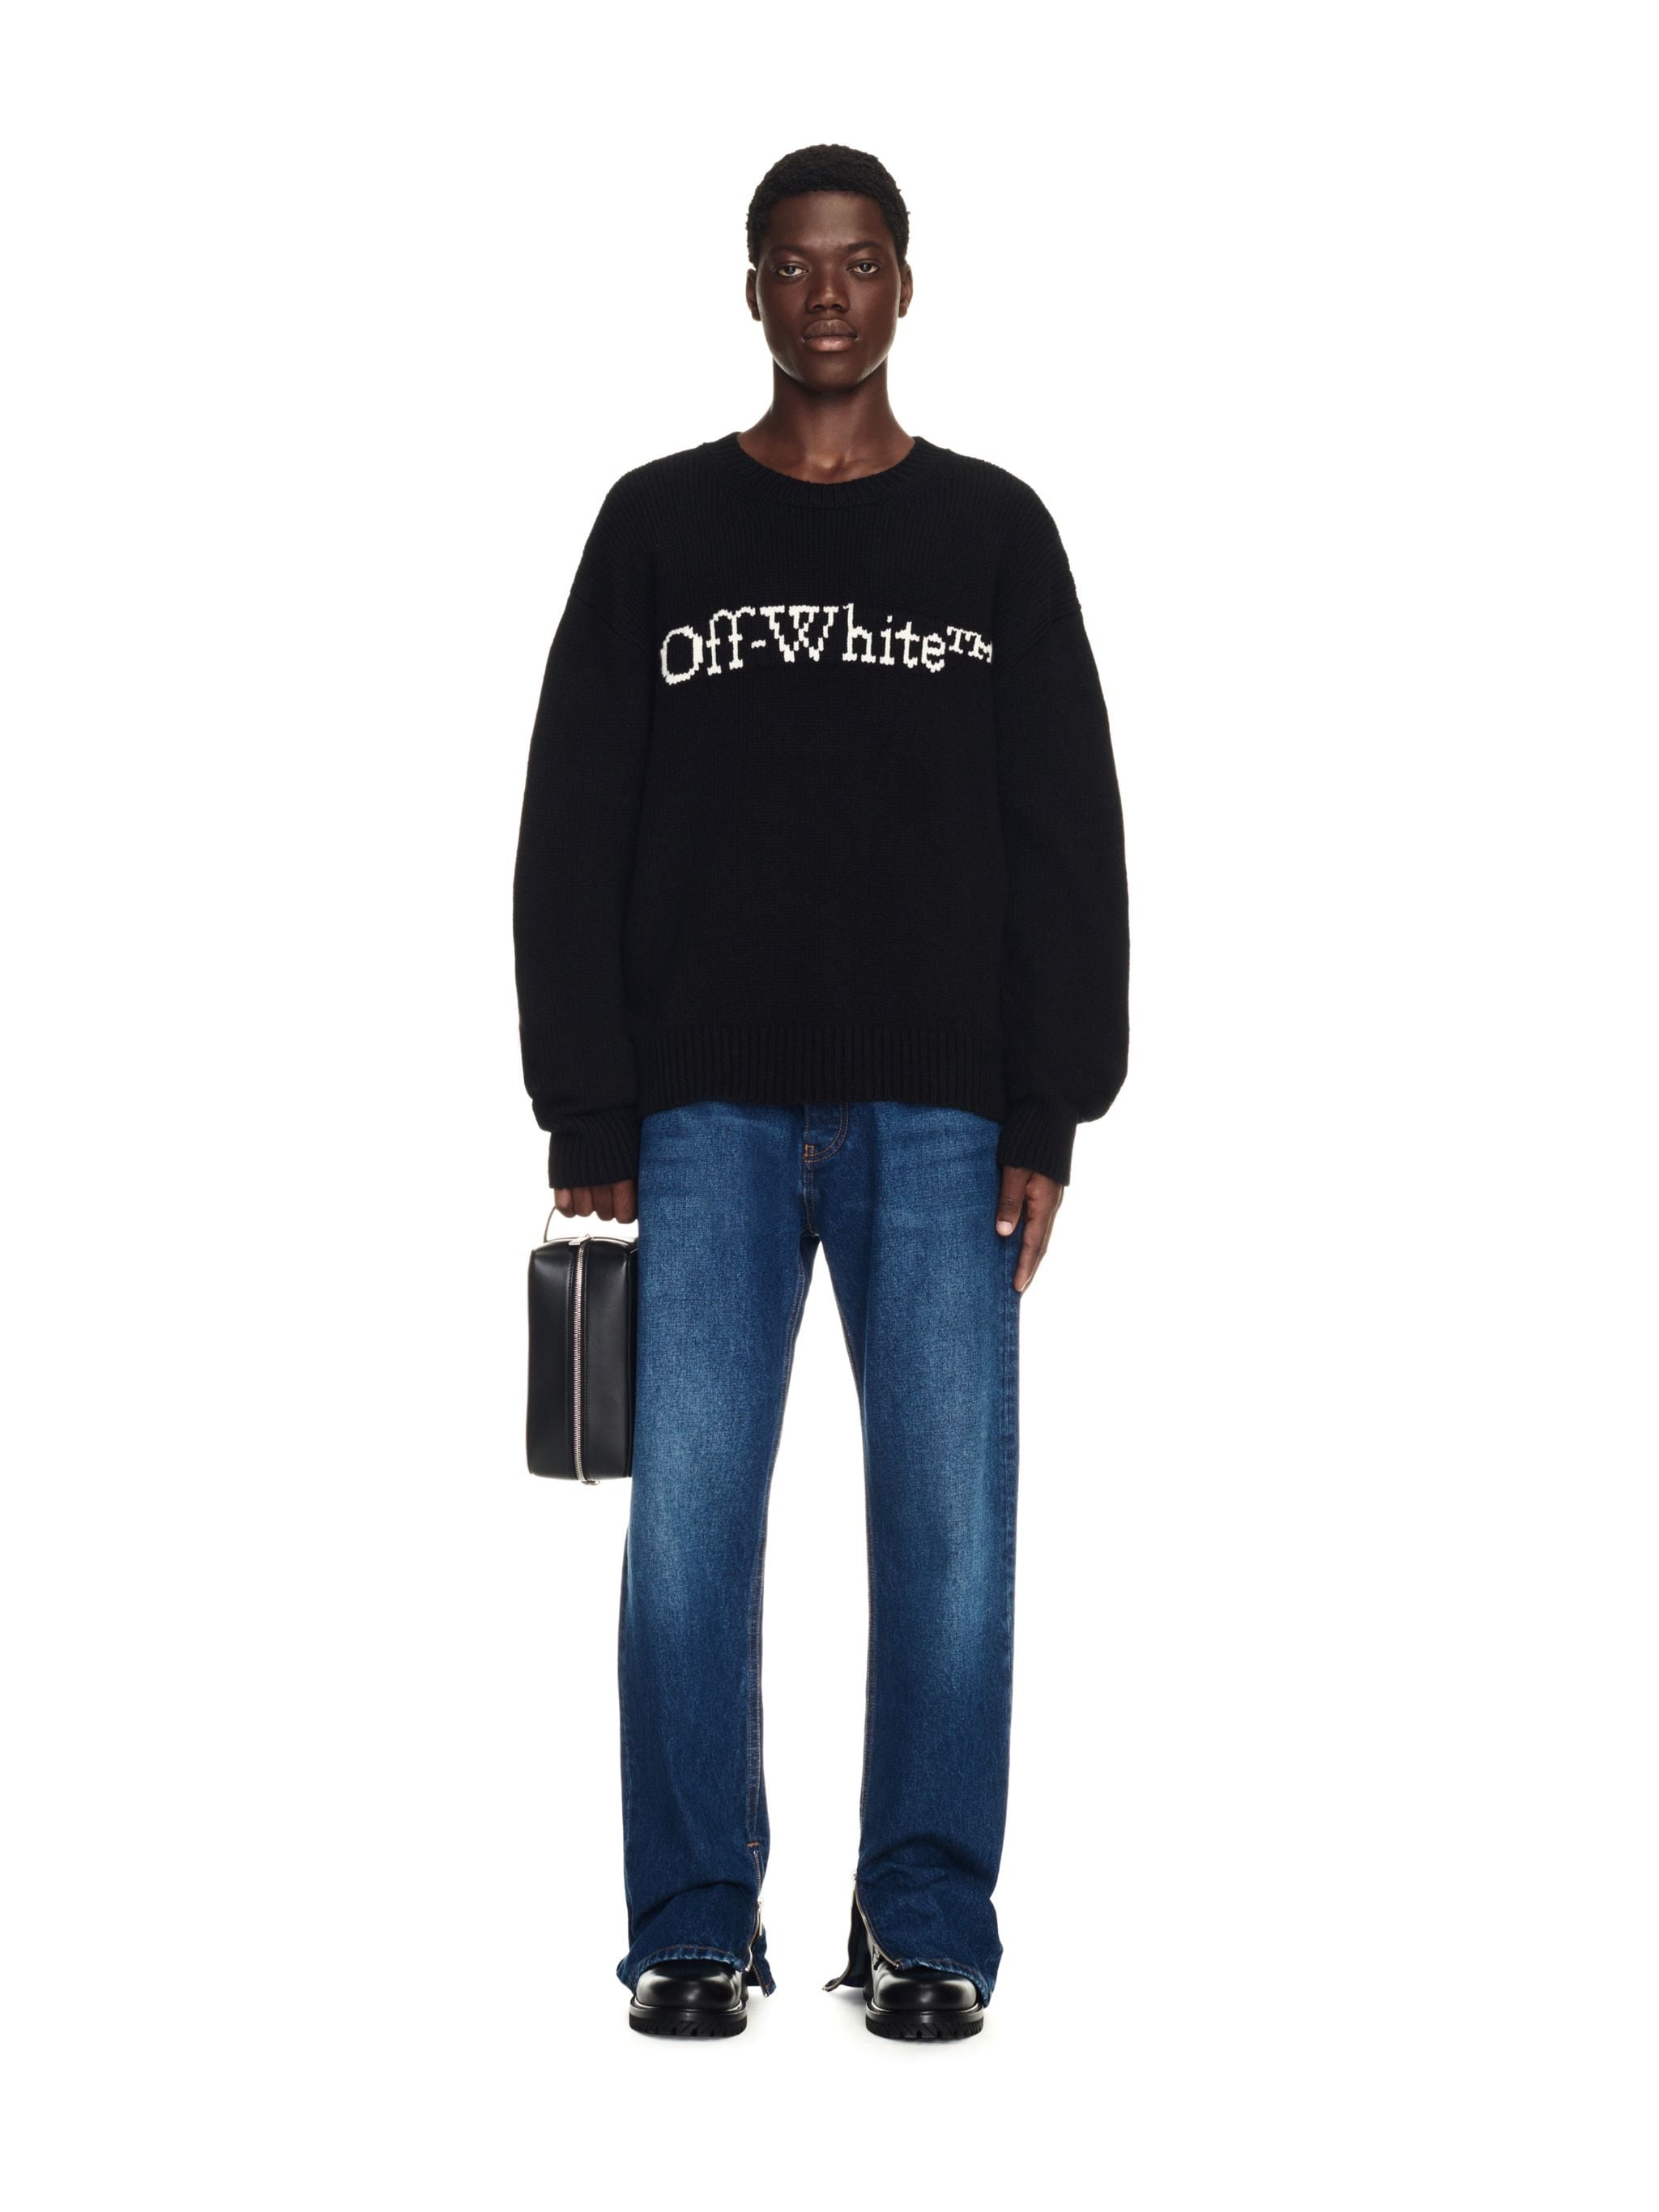 offwhite's post